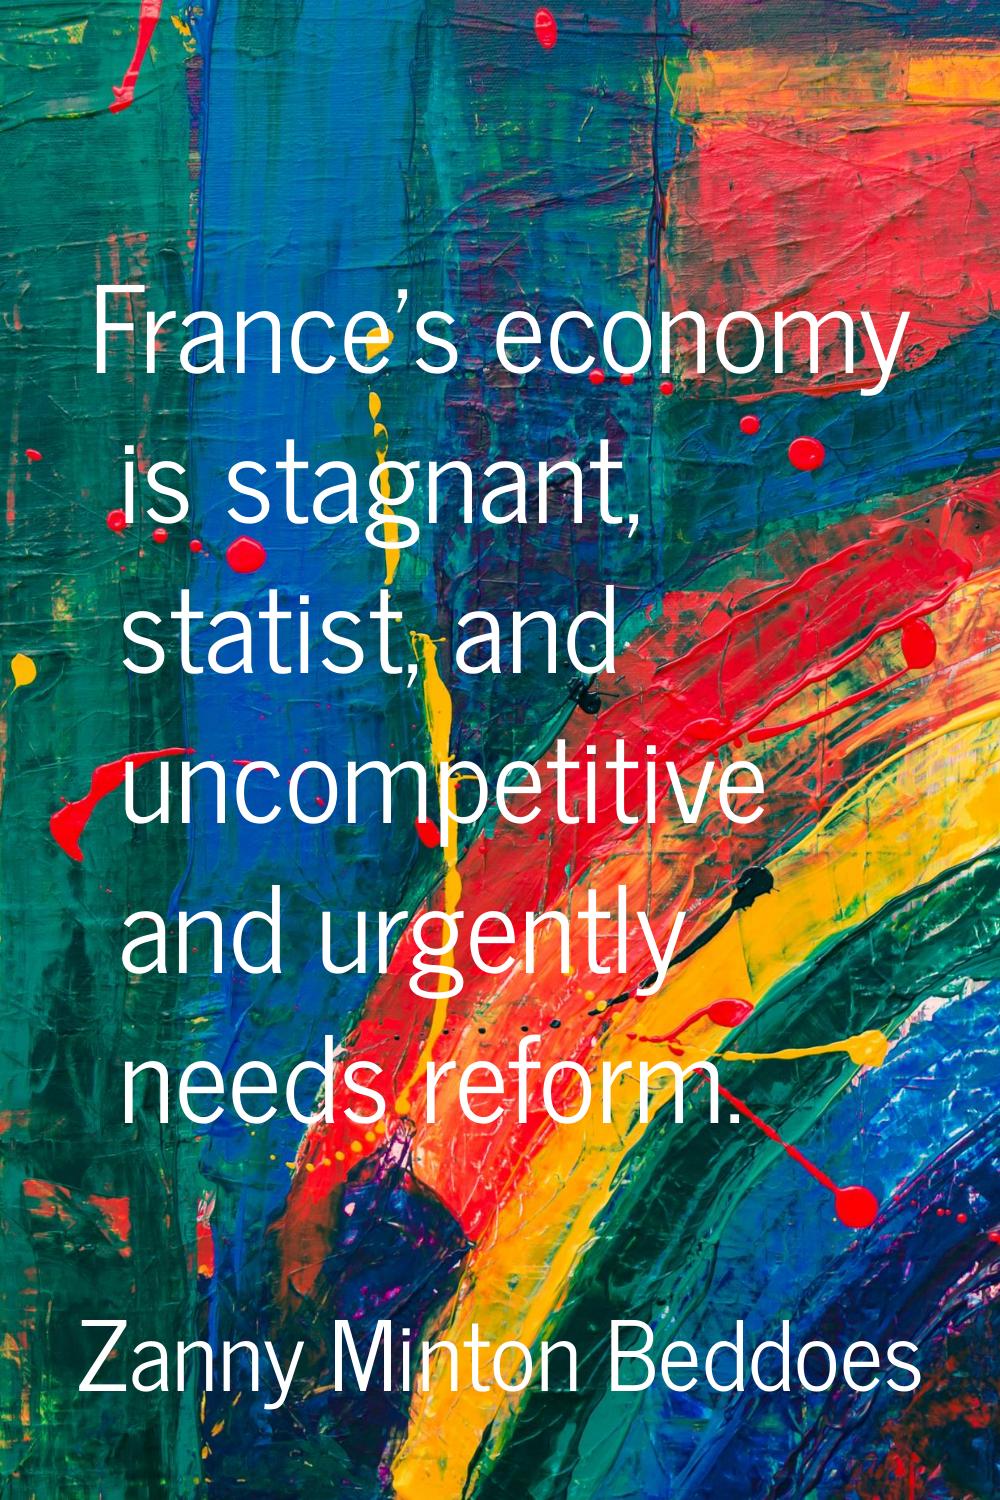 France's economy is stagnant, statist, and uncompetitive and urgently needs reform.